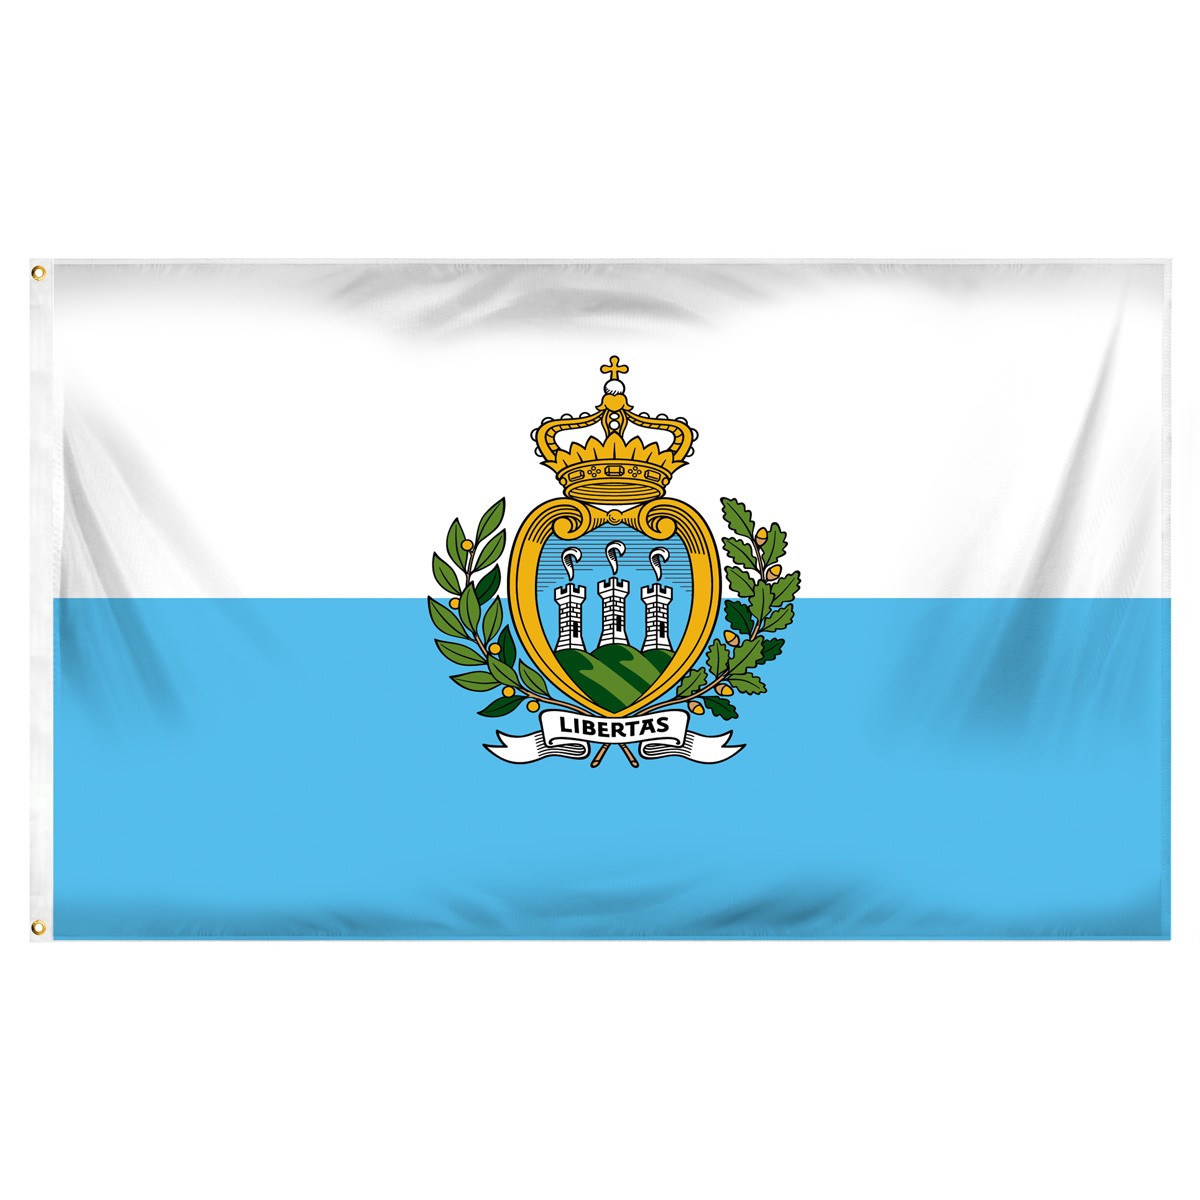 San Marino Submit Flags and Flags